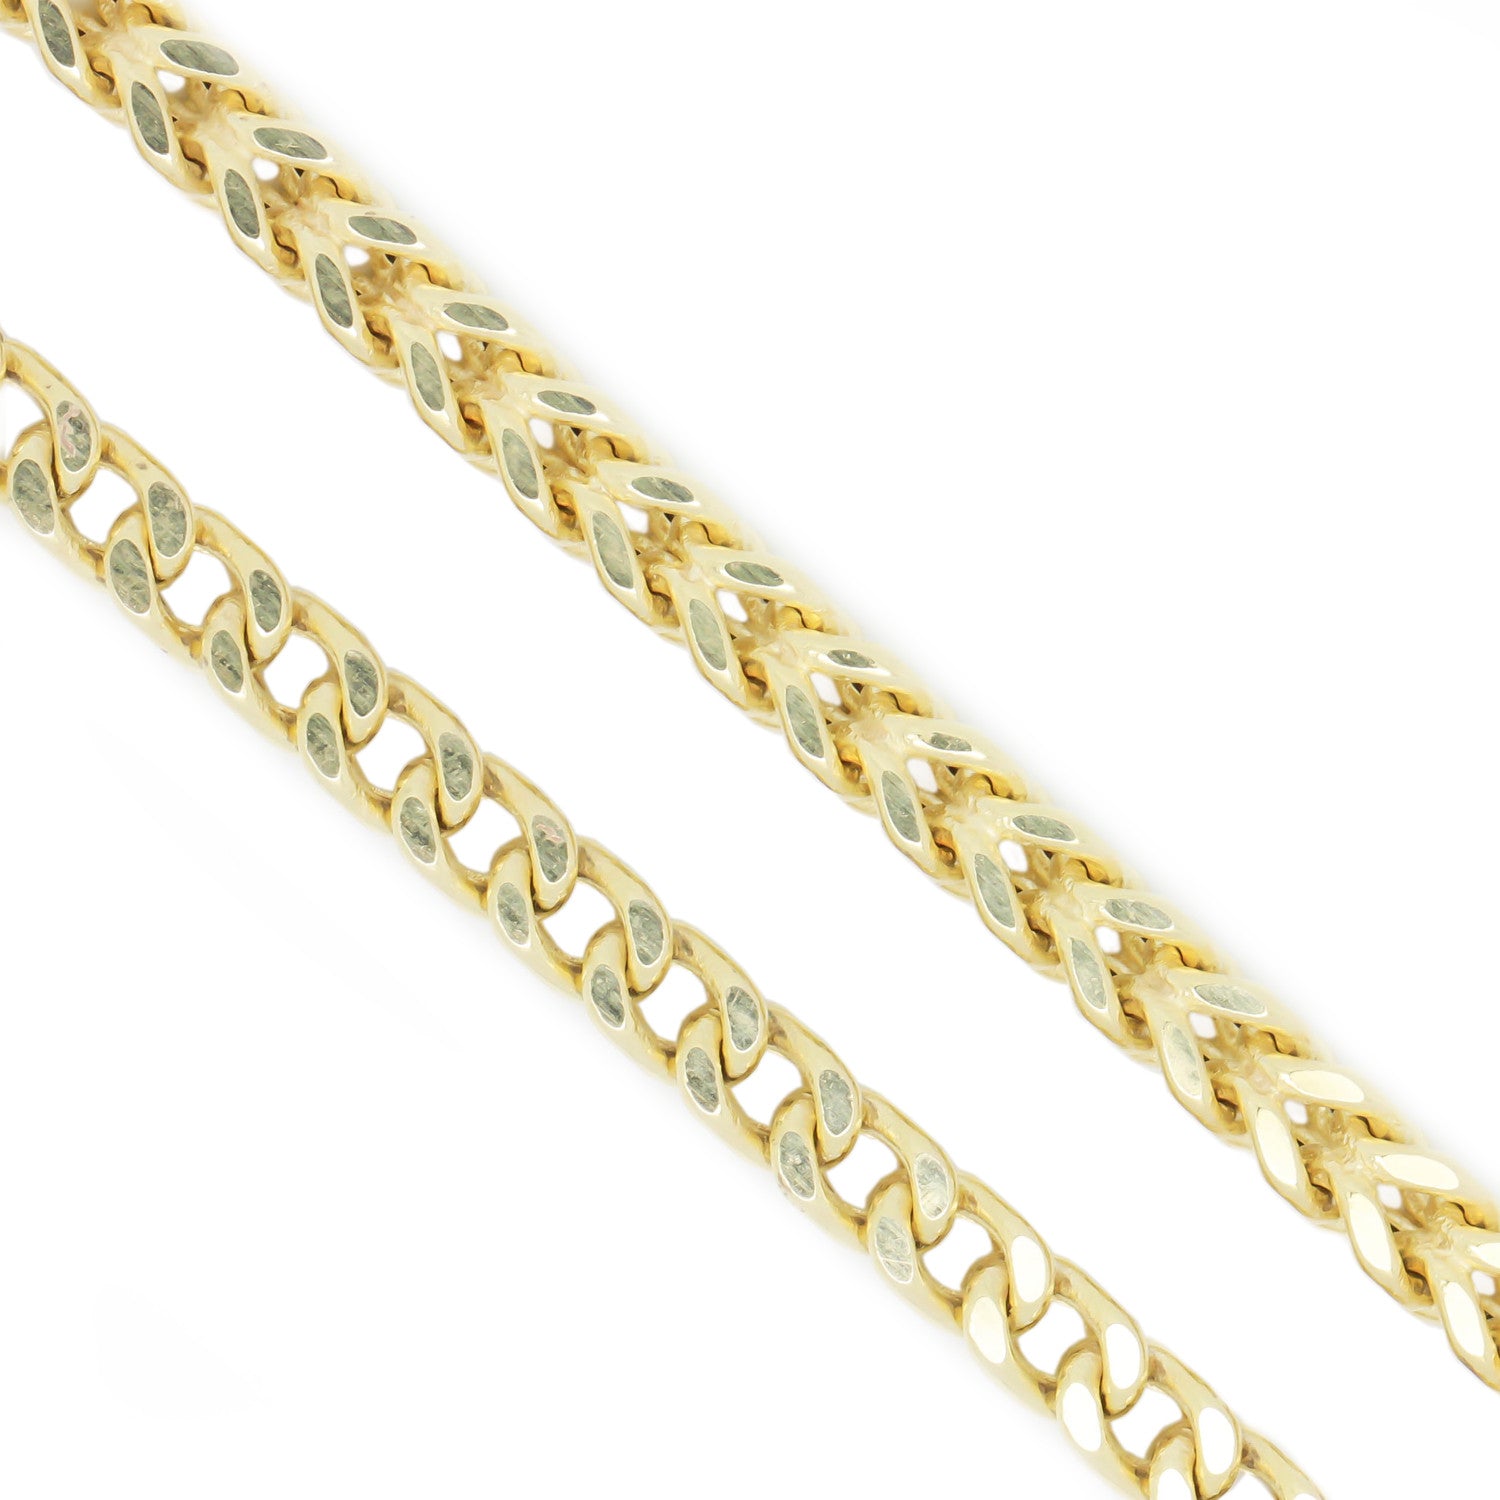 10K Yellow Gold 4.2 mm Franco Chain Necklace 30 Inches Diamond Cut